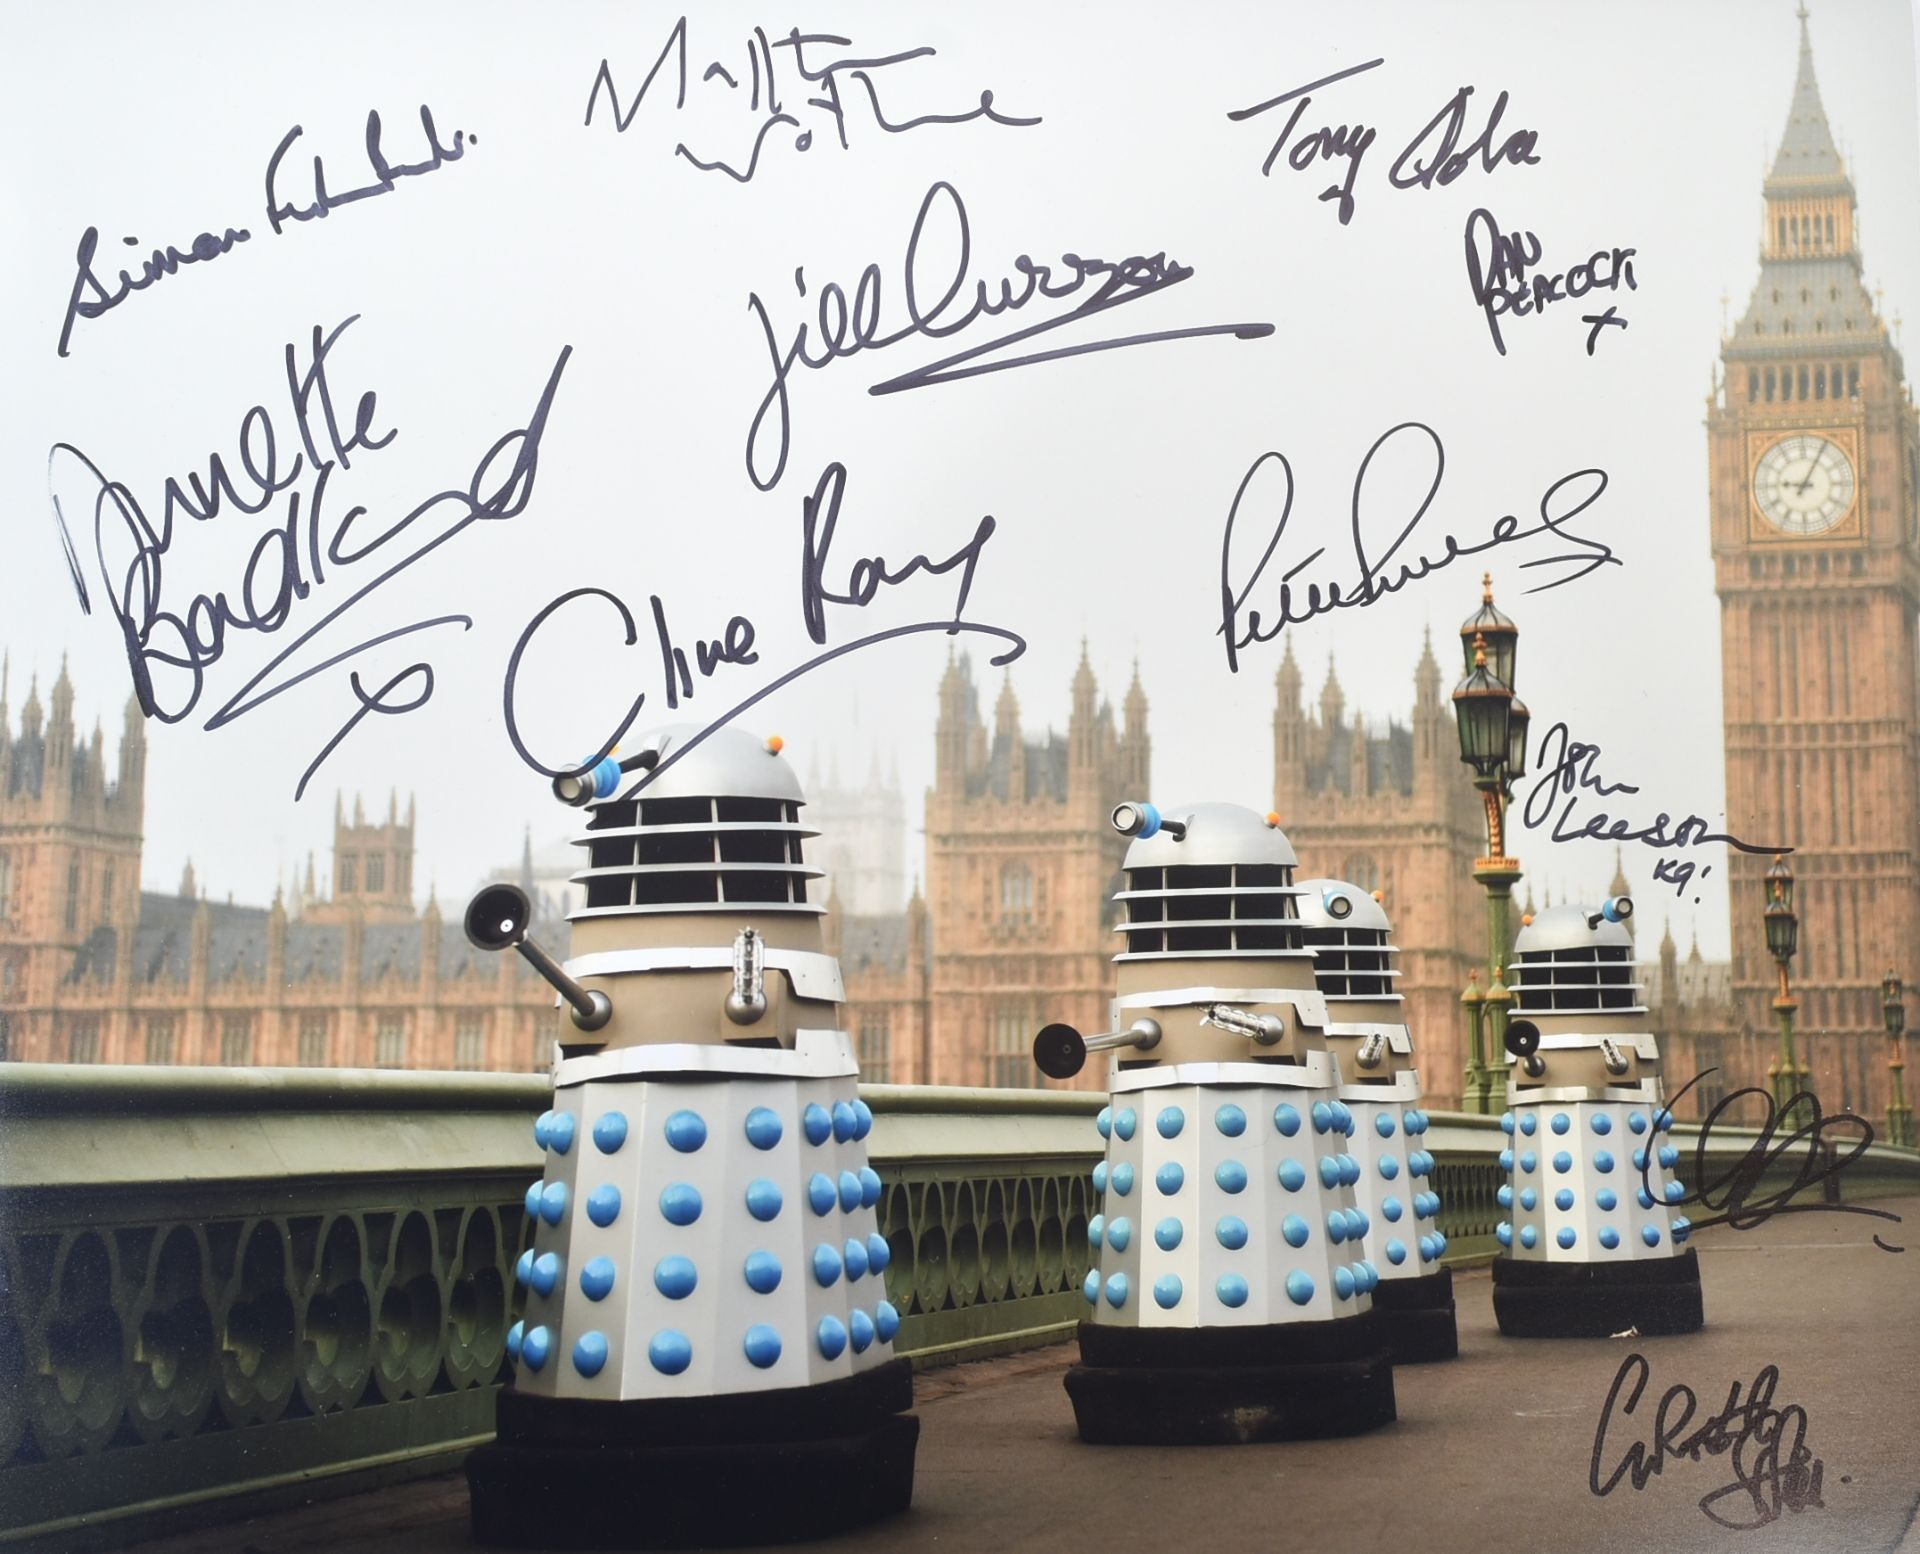 DOCTOR WHO - LARGE MULTI-SIGNED 12X14" COLOUR PHOTOGRAPH